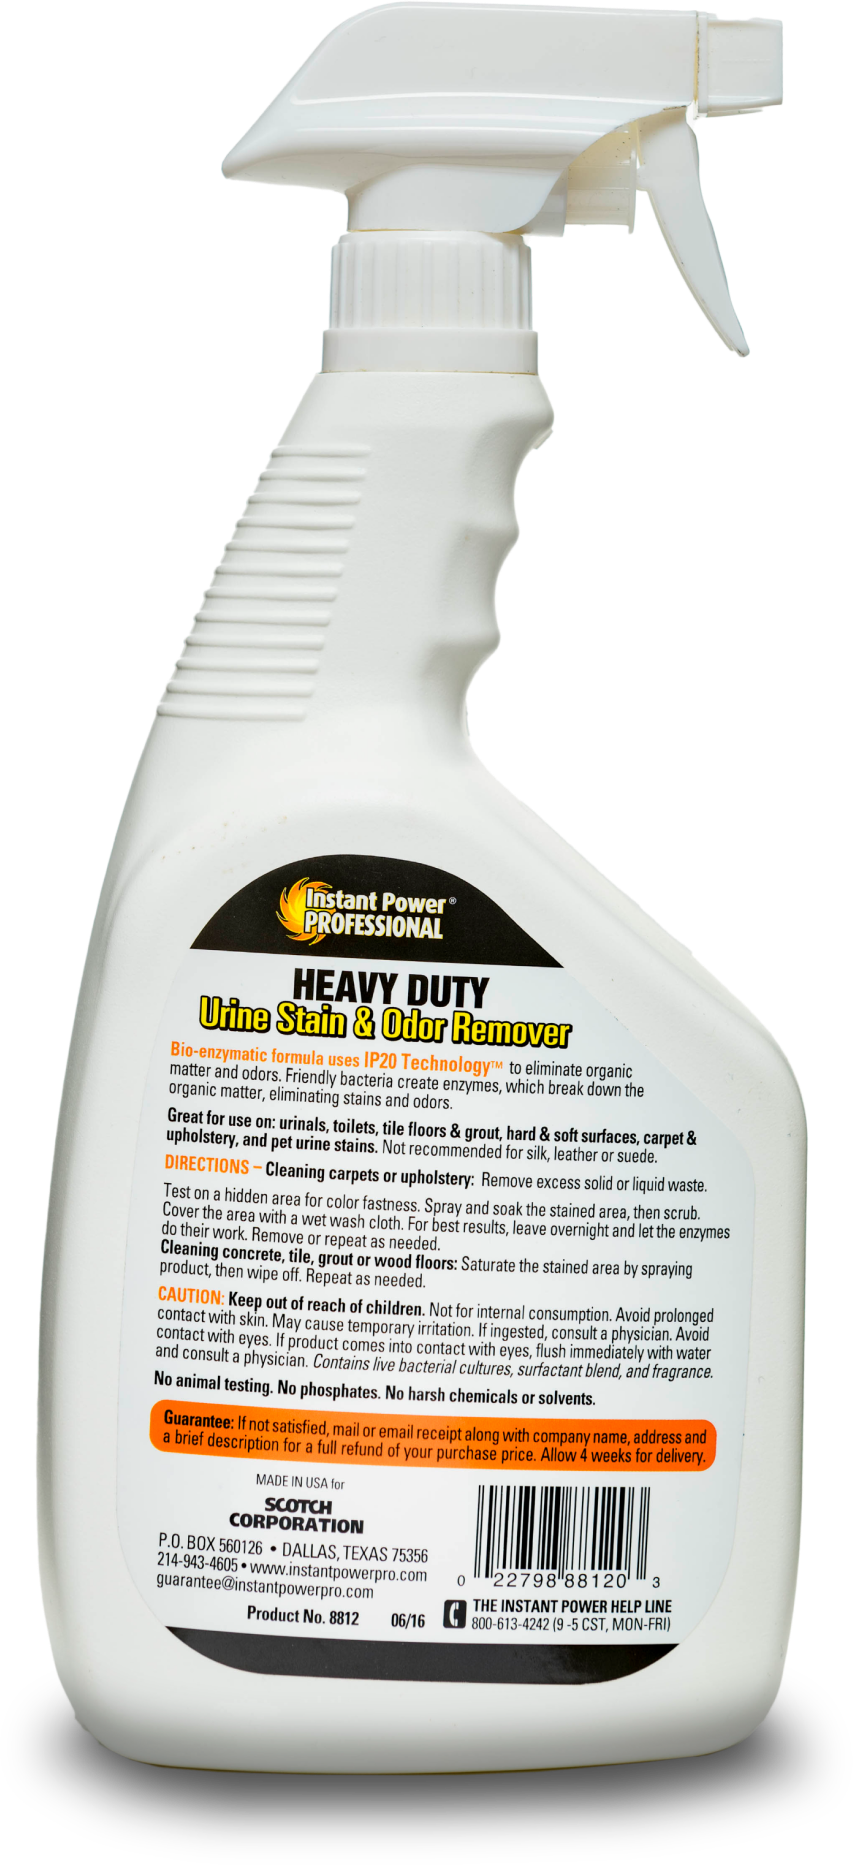 Instant Power Professional 1 gal. Heavy Duty Urine Stain and Odor Remover, 1 ea 8813